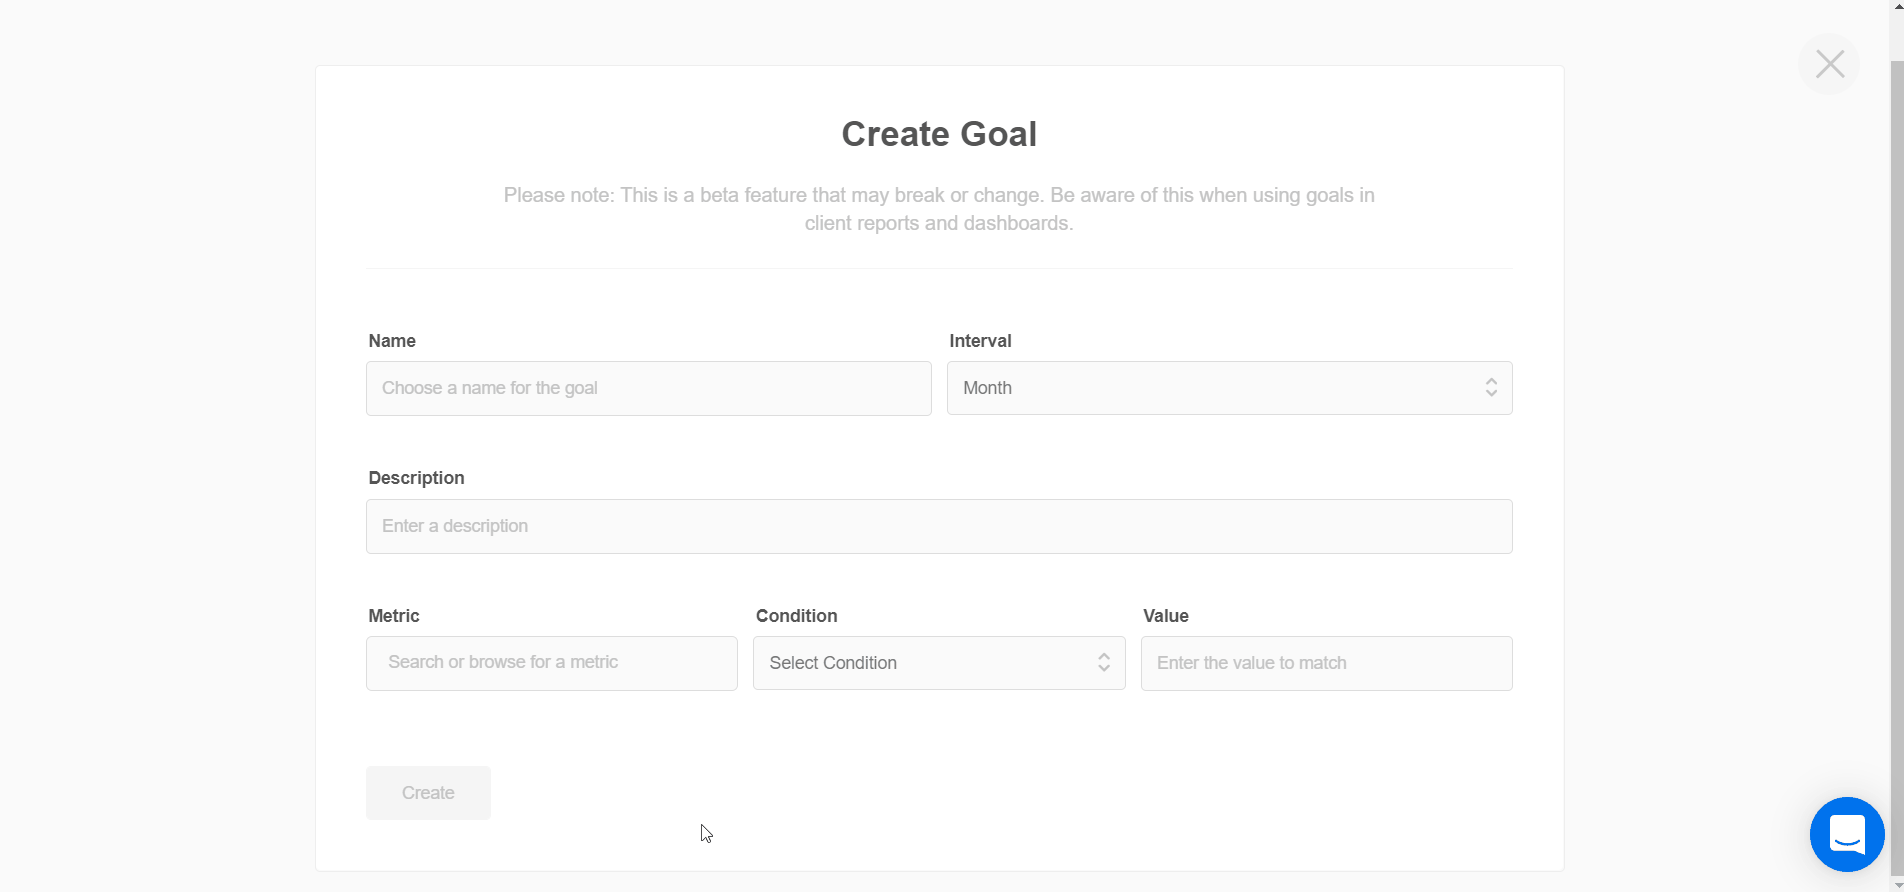 Step 2: Select a metric for your goal